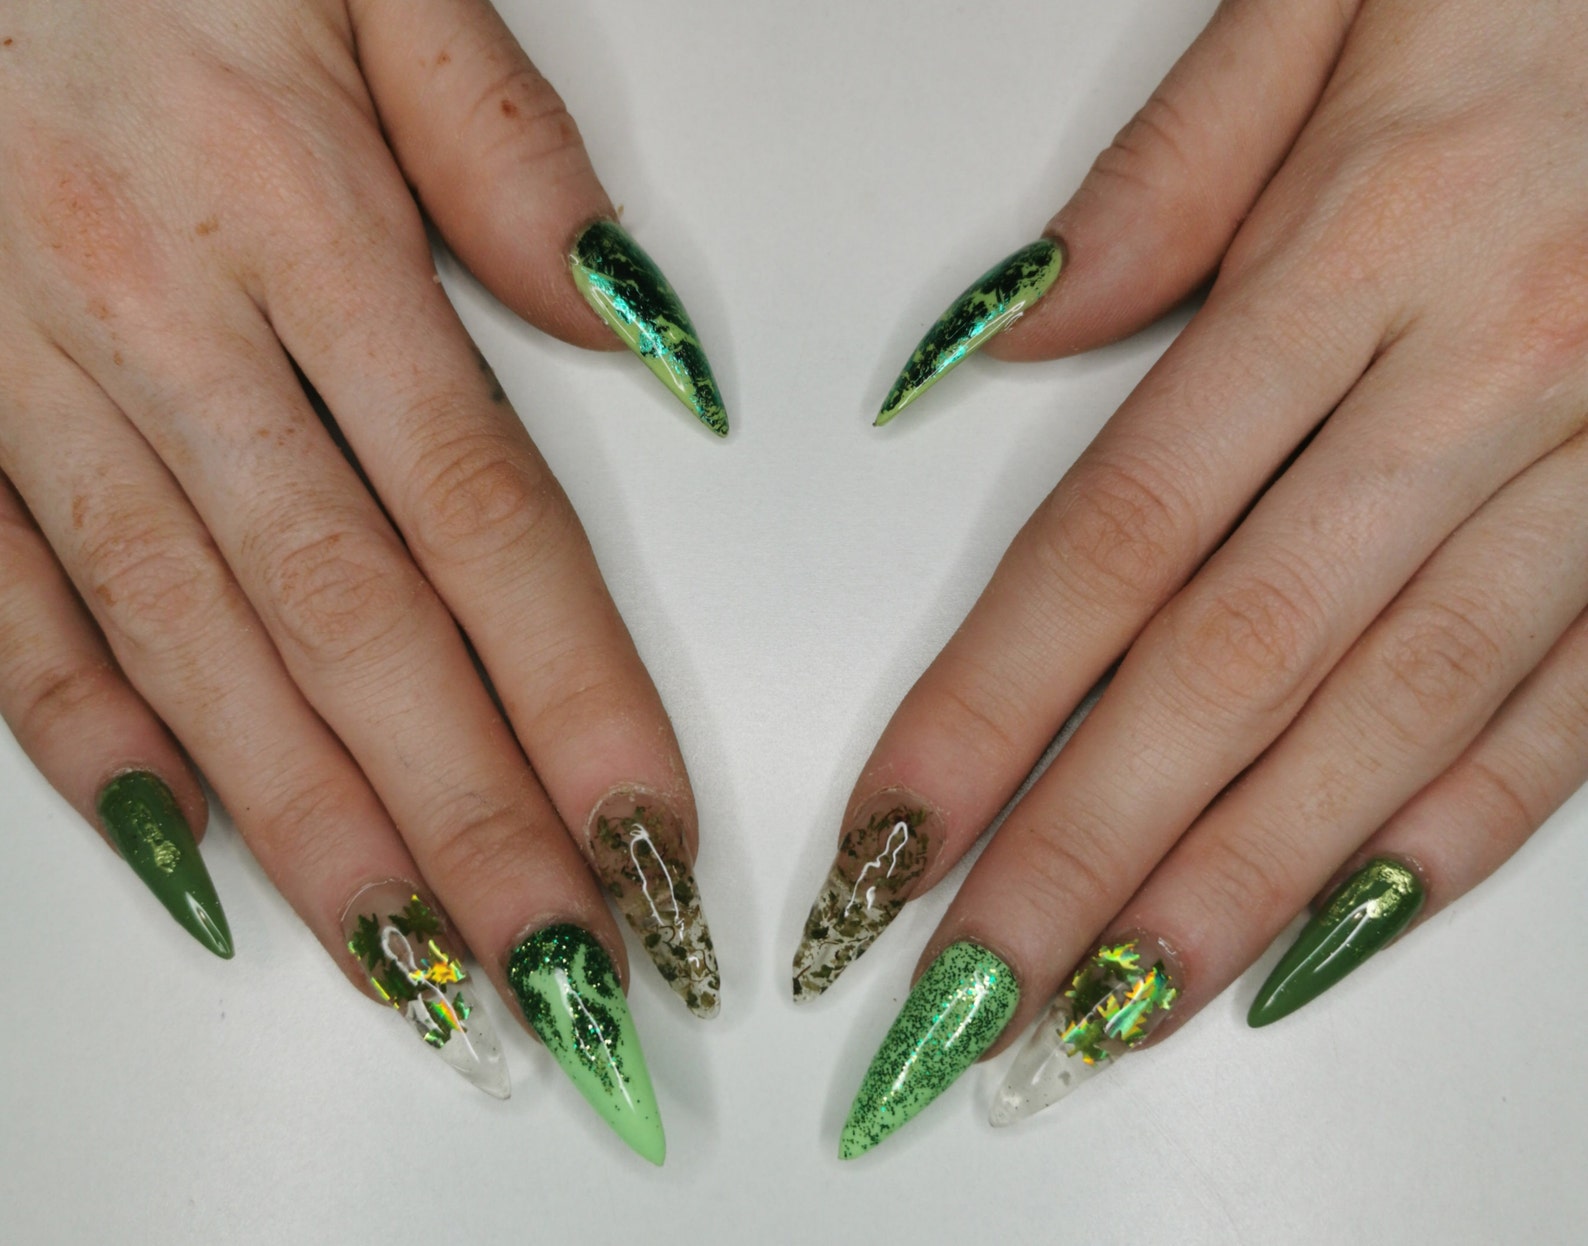 6. "Stiletto Nails with Cannabis Leaf Print" - wide 6